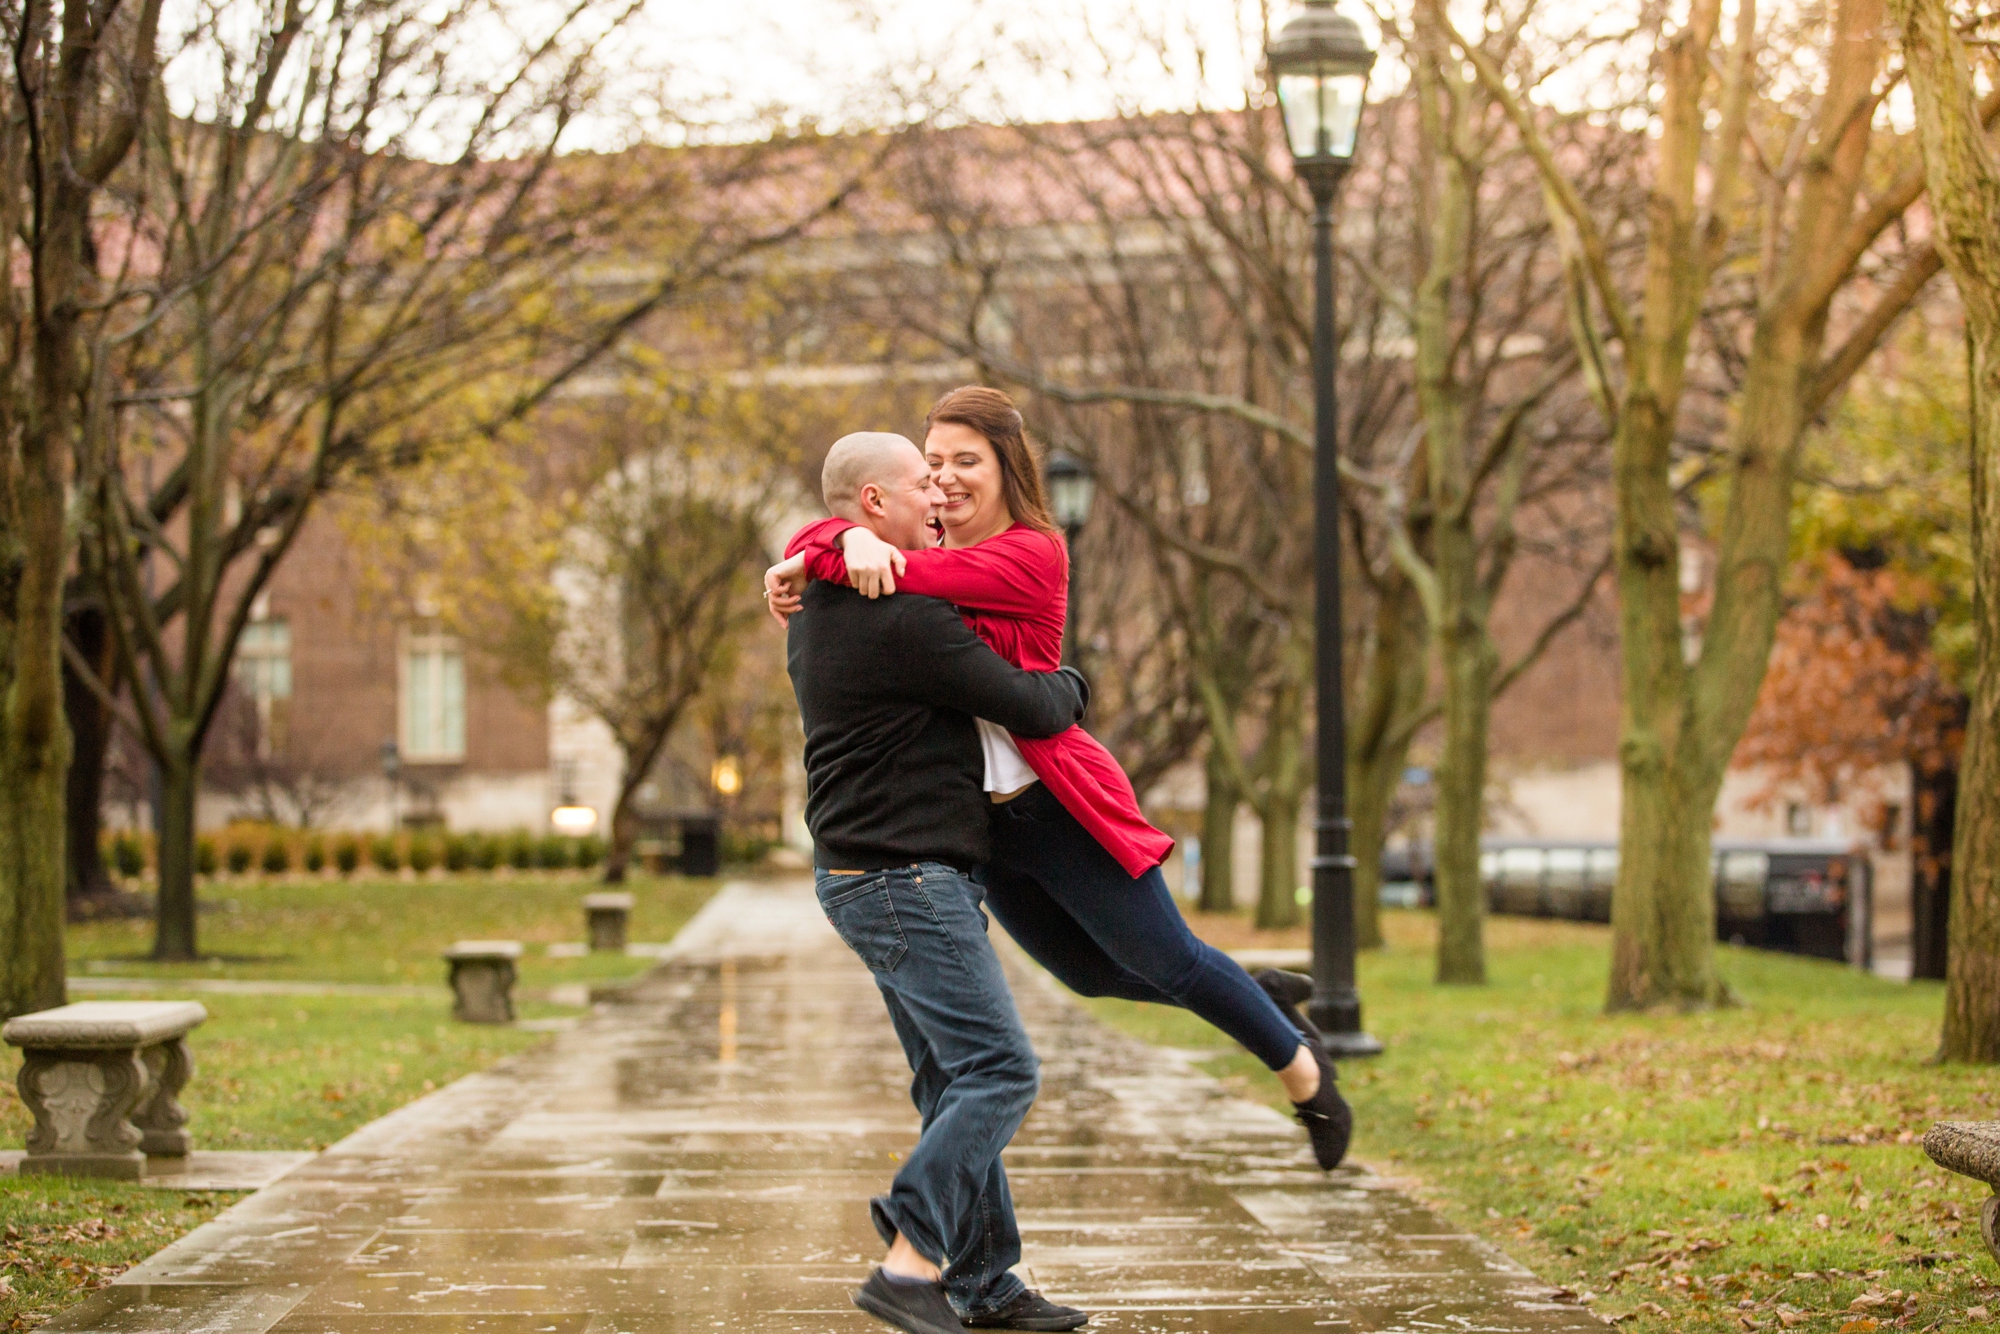 pittsburgh wedding photographer, pittsburgh engagement photos, best spot in pittsburgh for photo shoot, mellon institute wedding photos, university of pittsburgh wedding photos